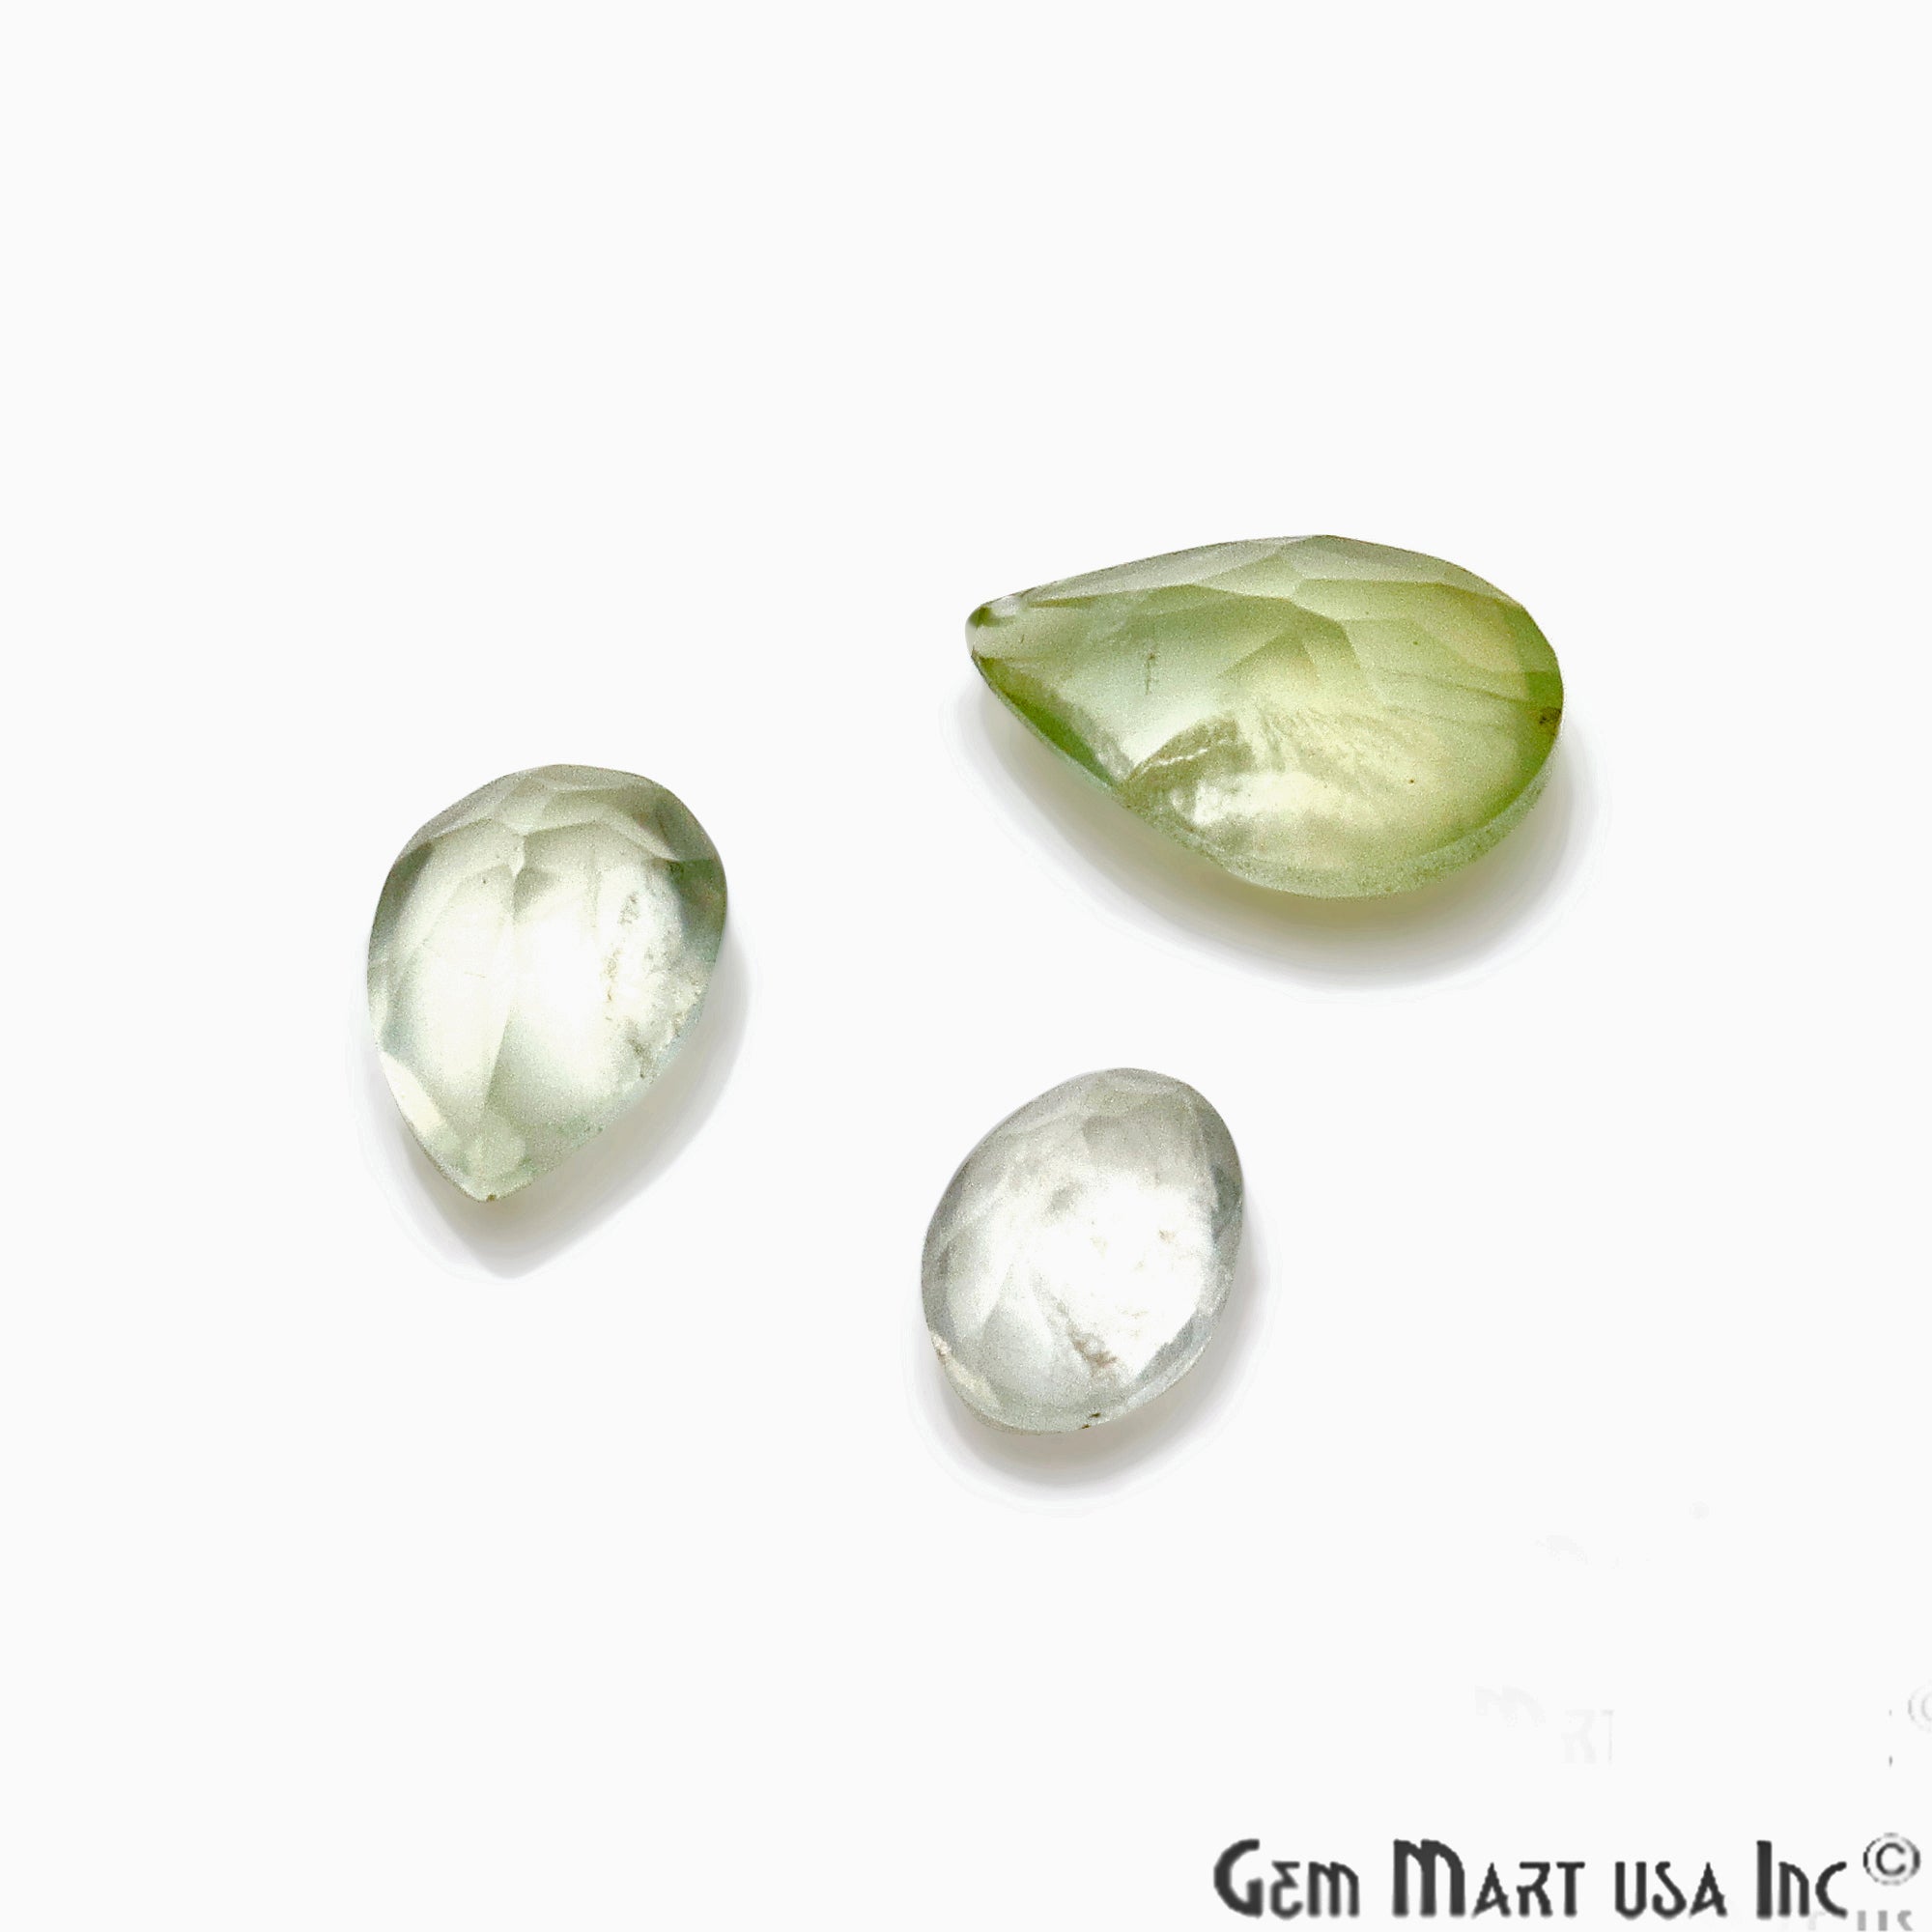 50ct Lot Prehnite Mix Shaped 7-12mm Stone, Faceted Gemstone Mixed lot, Loose Stones - GemMartUSA